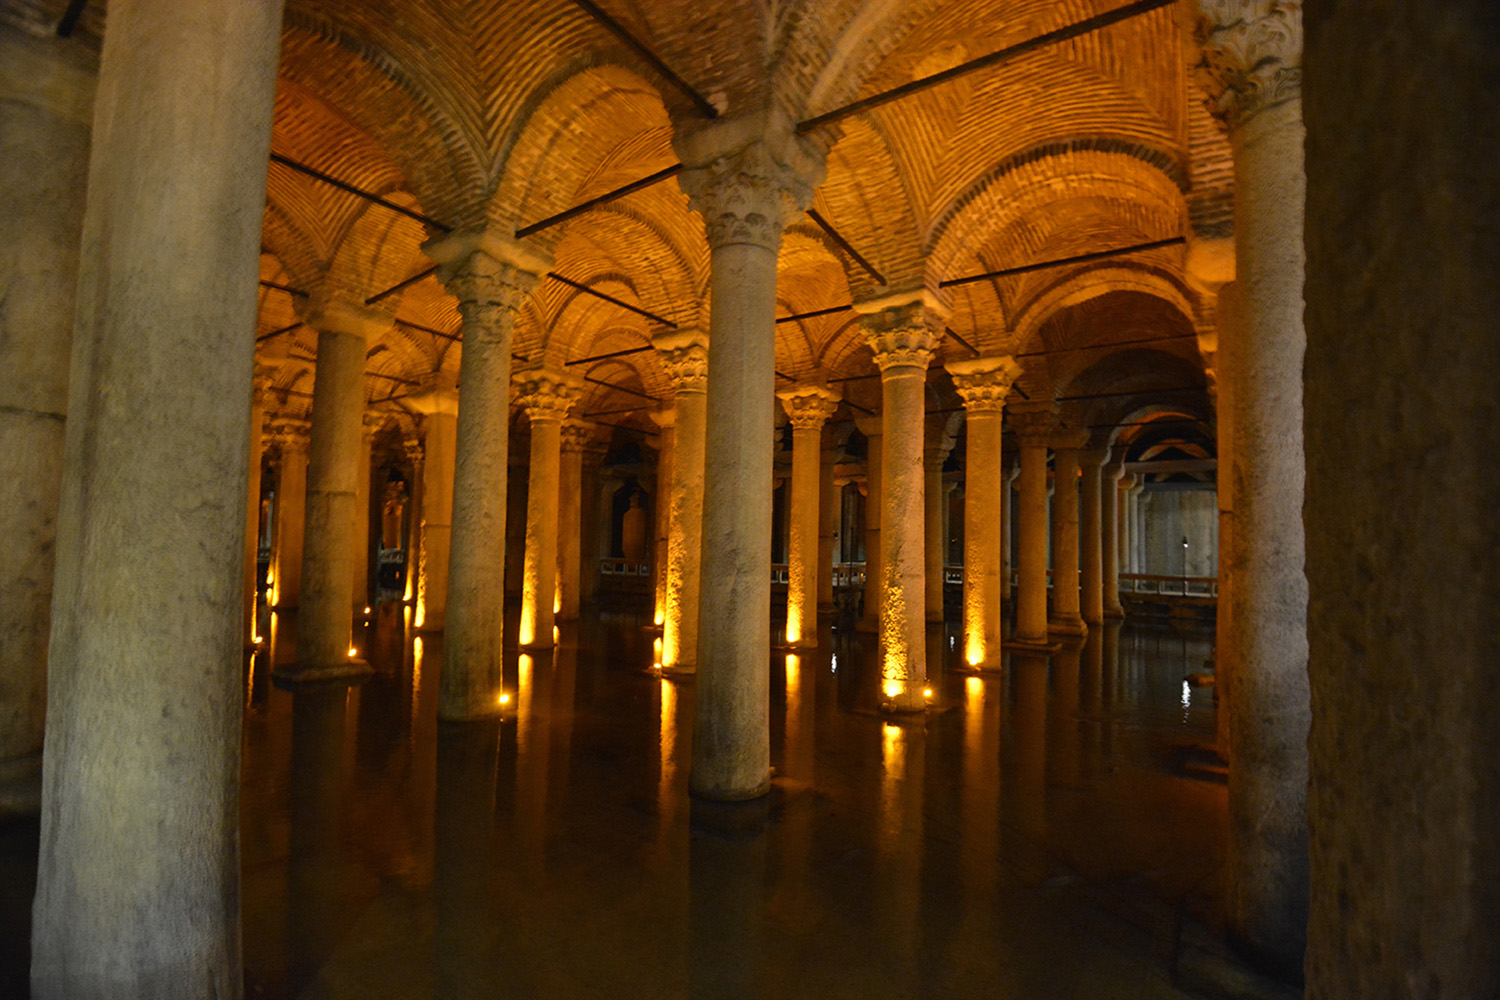 Interior view of the cistern's arched vaults and columns.